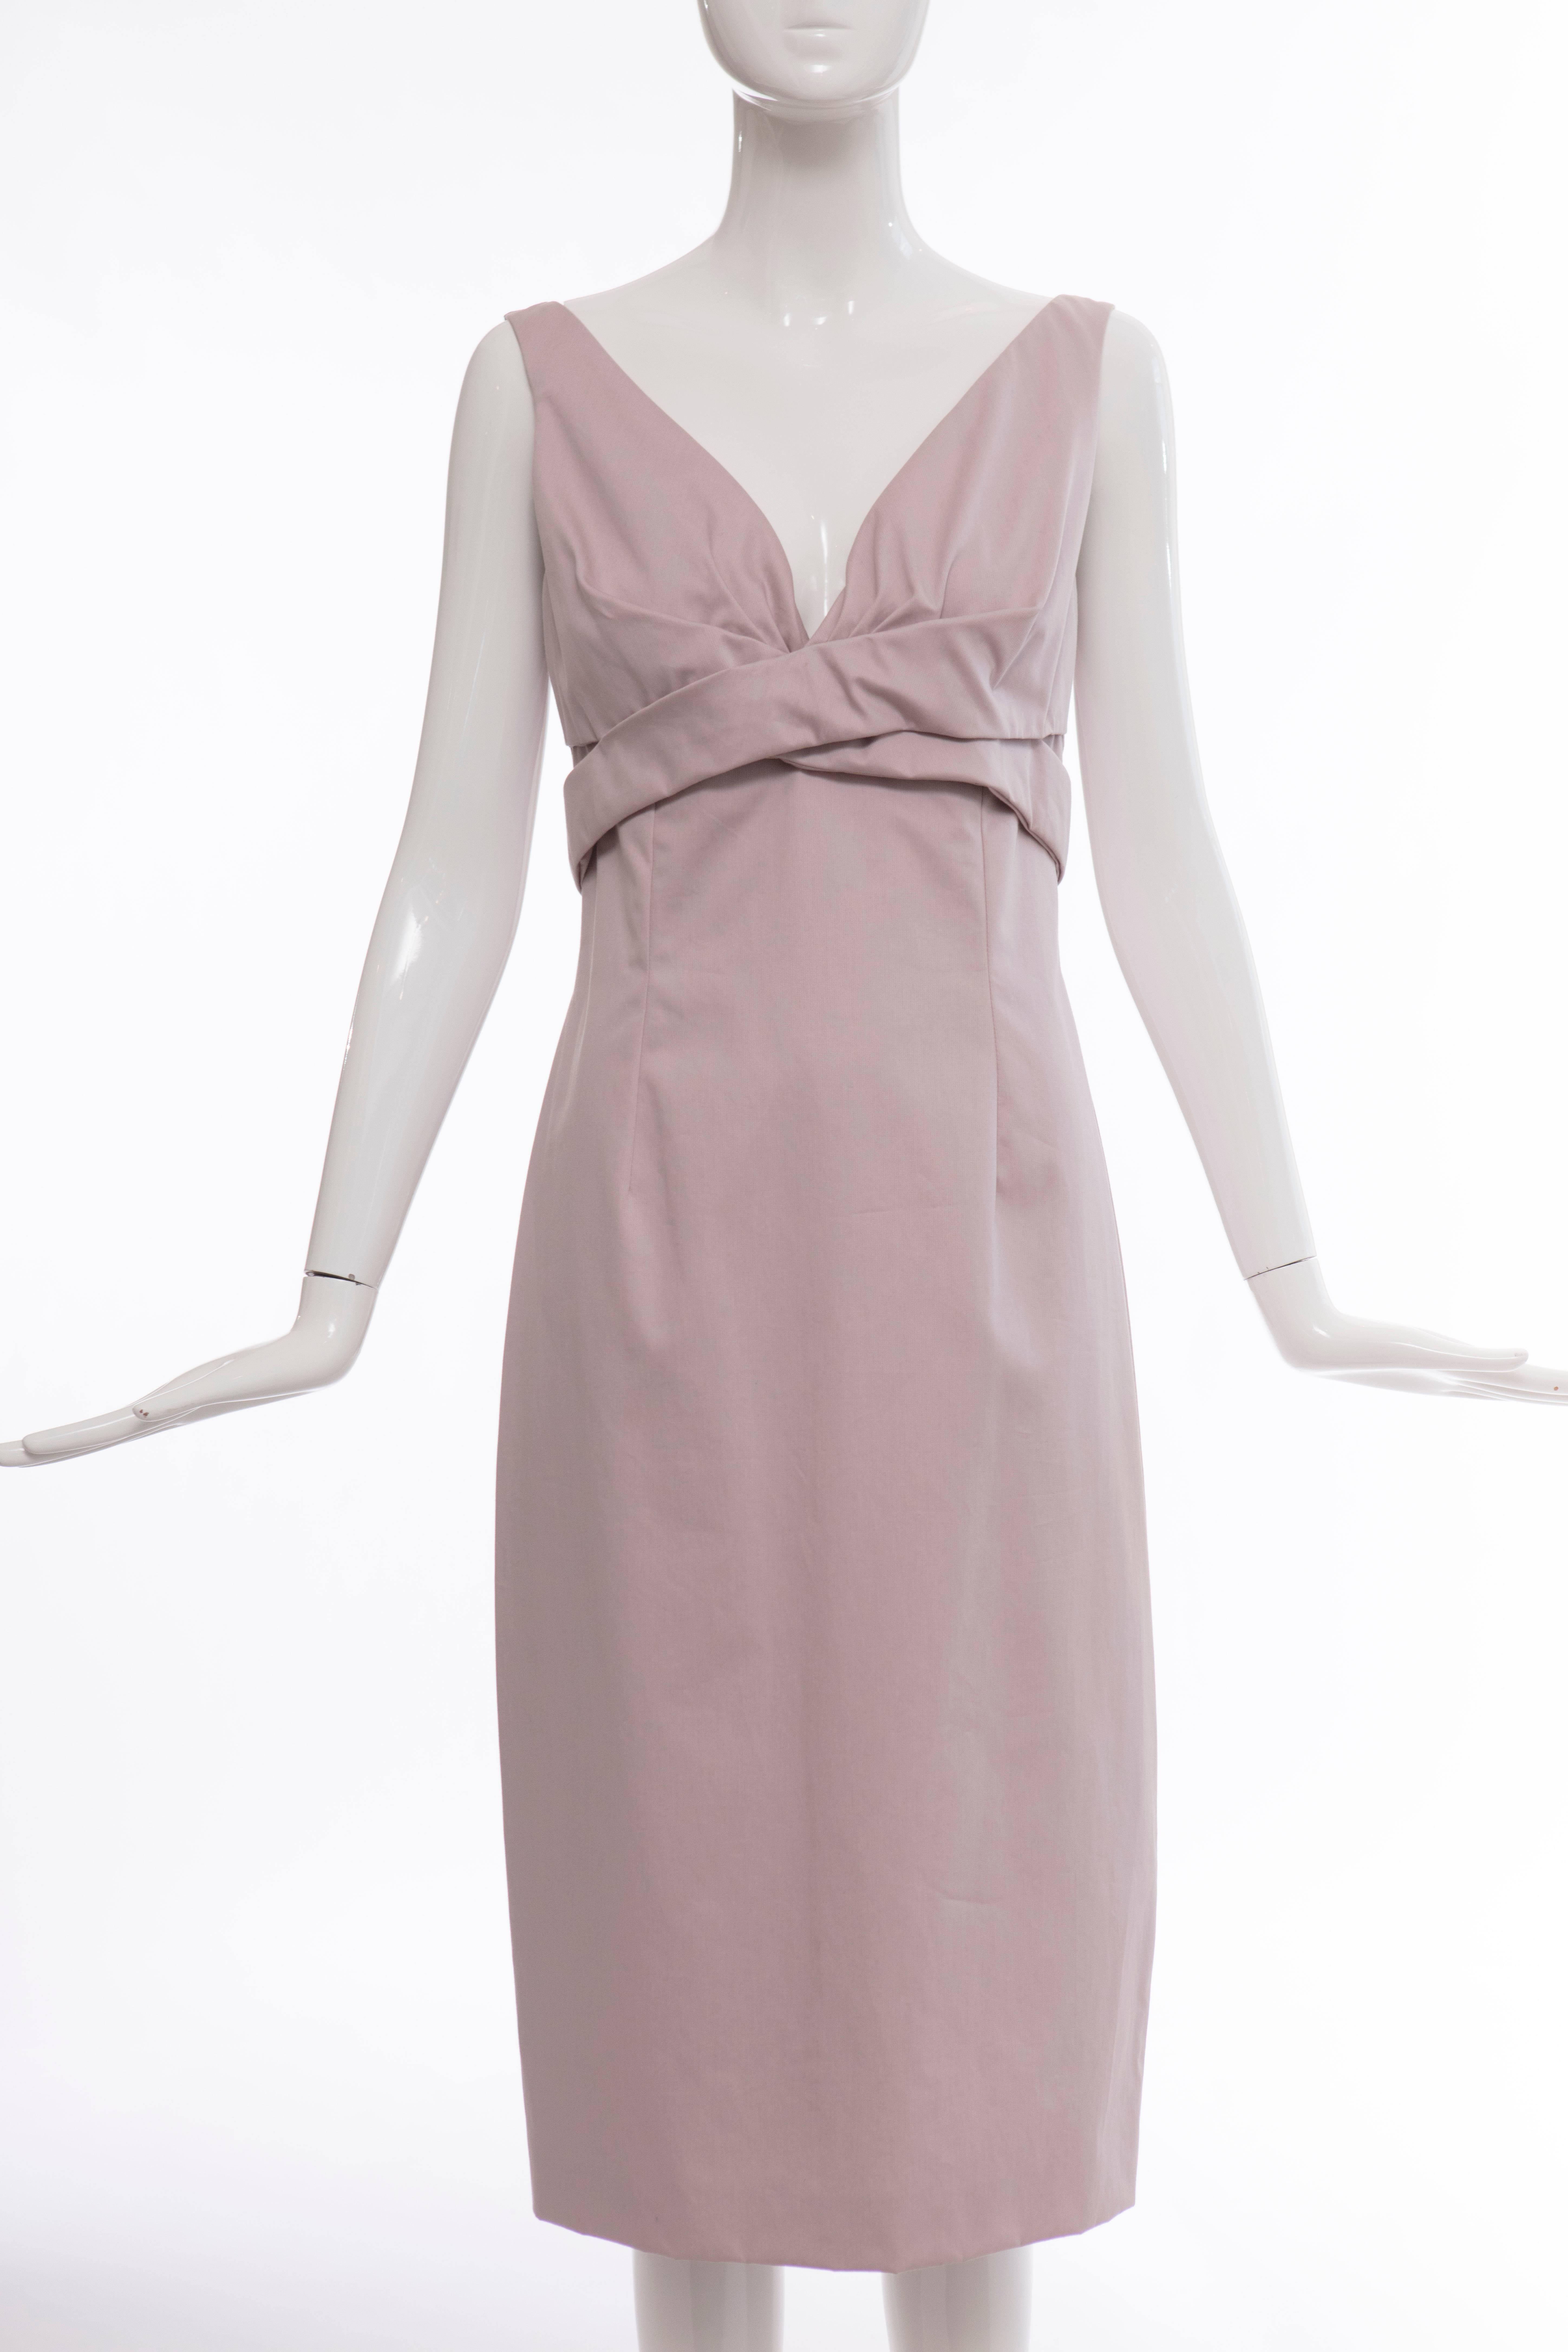 Alexander McQueen, Spring 2006 lilac cotton sleeveless dress with back zip and hook-and-eye closure and fully lined.

Retail: $1250

EU. 42
US. 6

Bust 32, Waist 28, Hips 37, Length 43